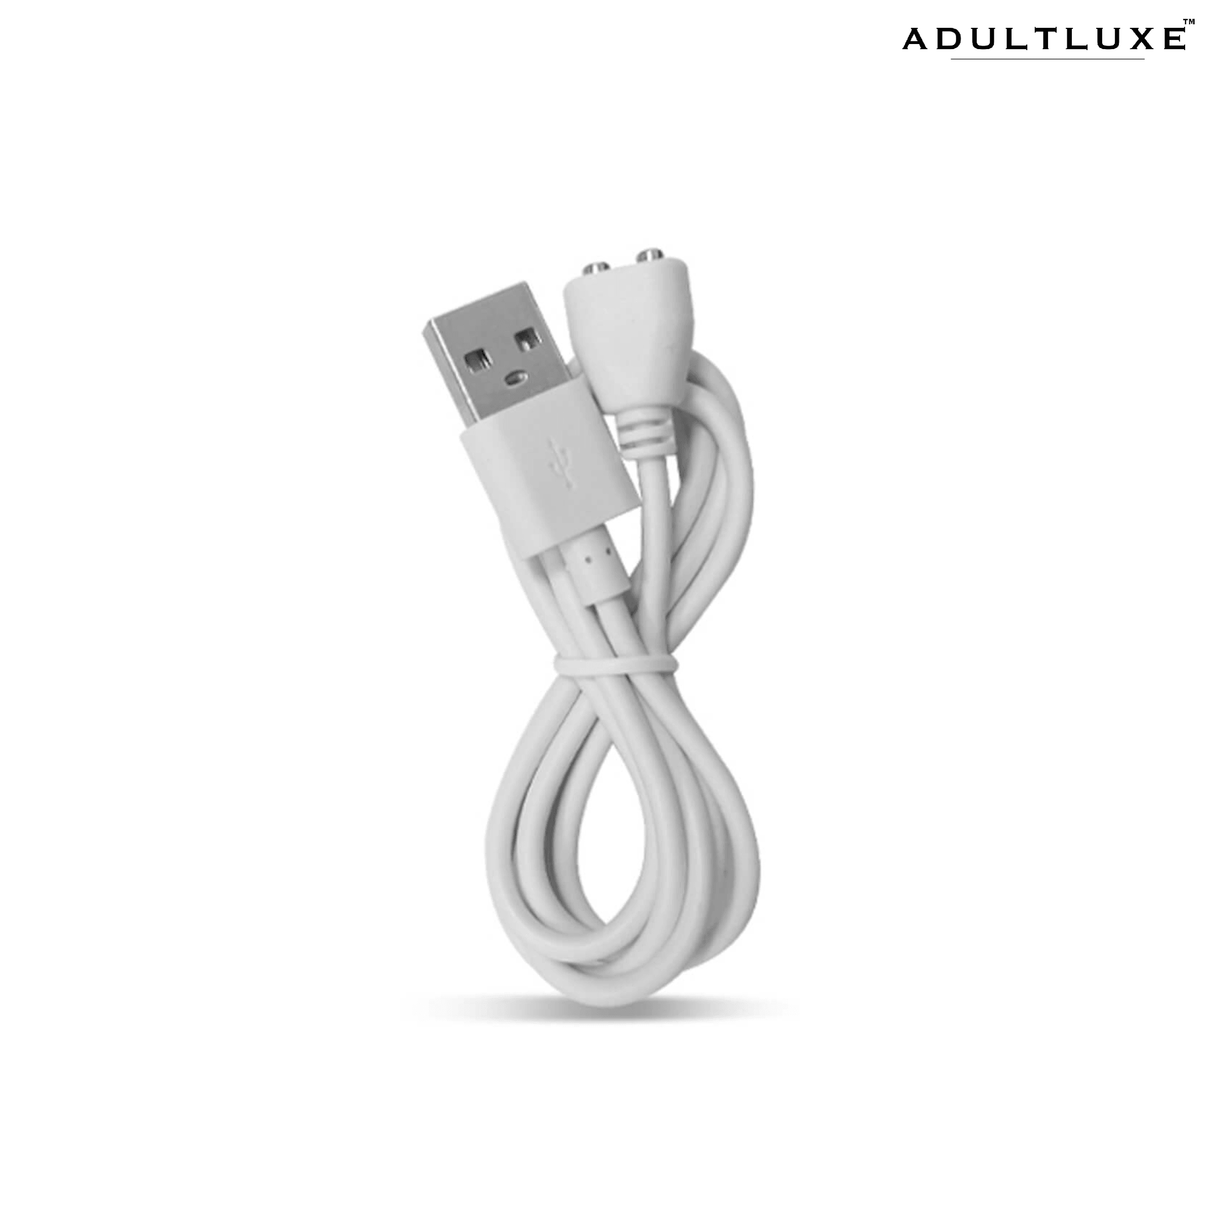 AdultLuxe Replacement Charger Cable